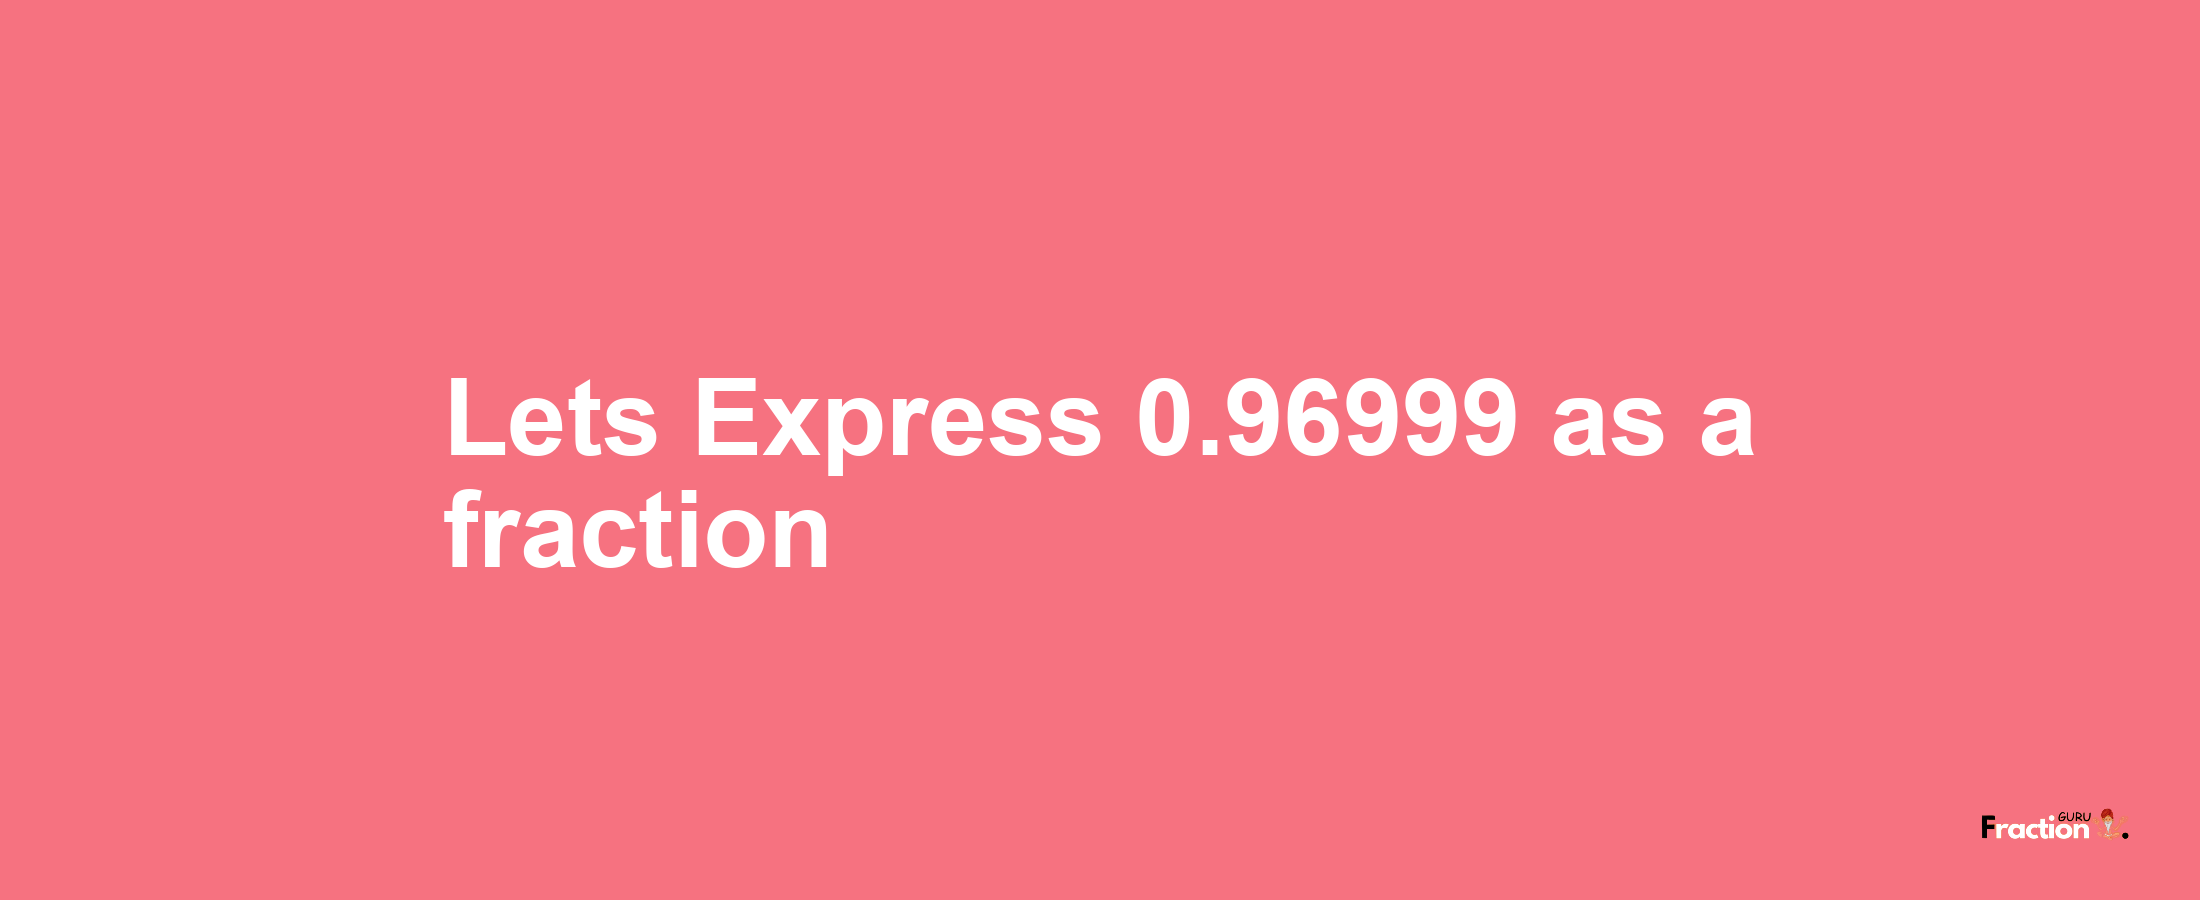 Lets Express 0.96999 as afraction